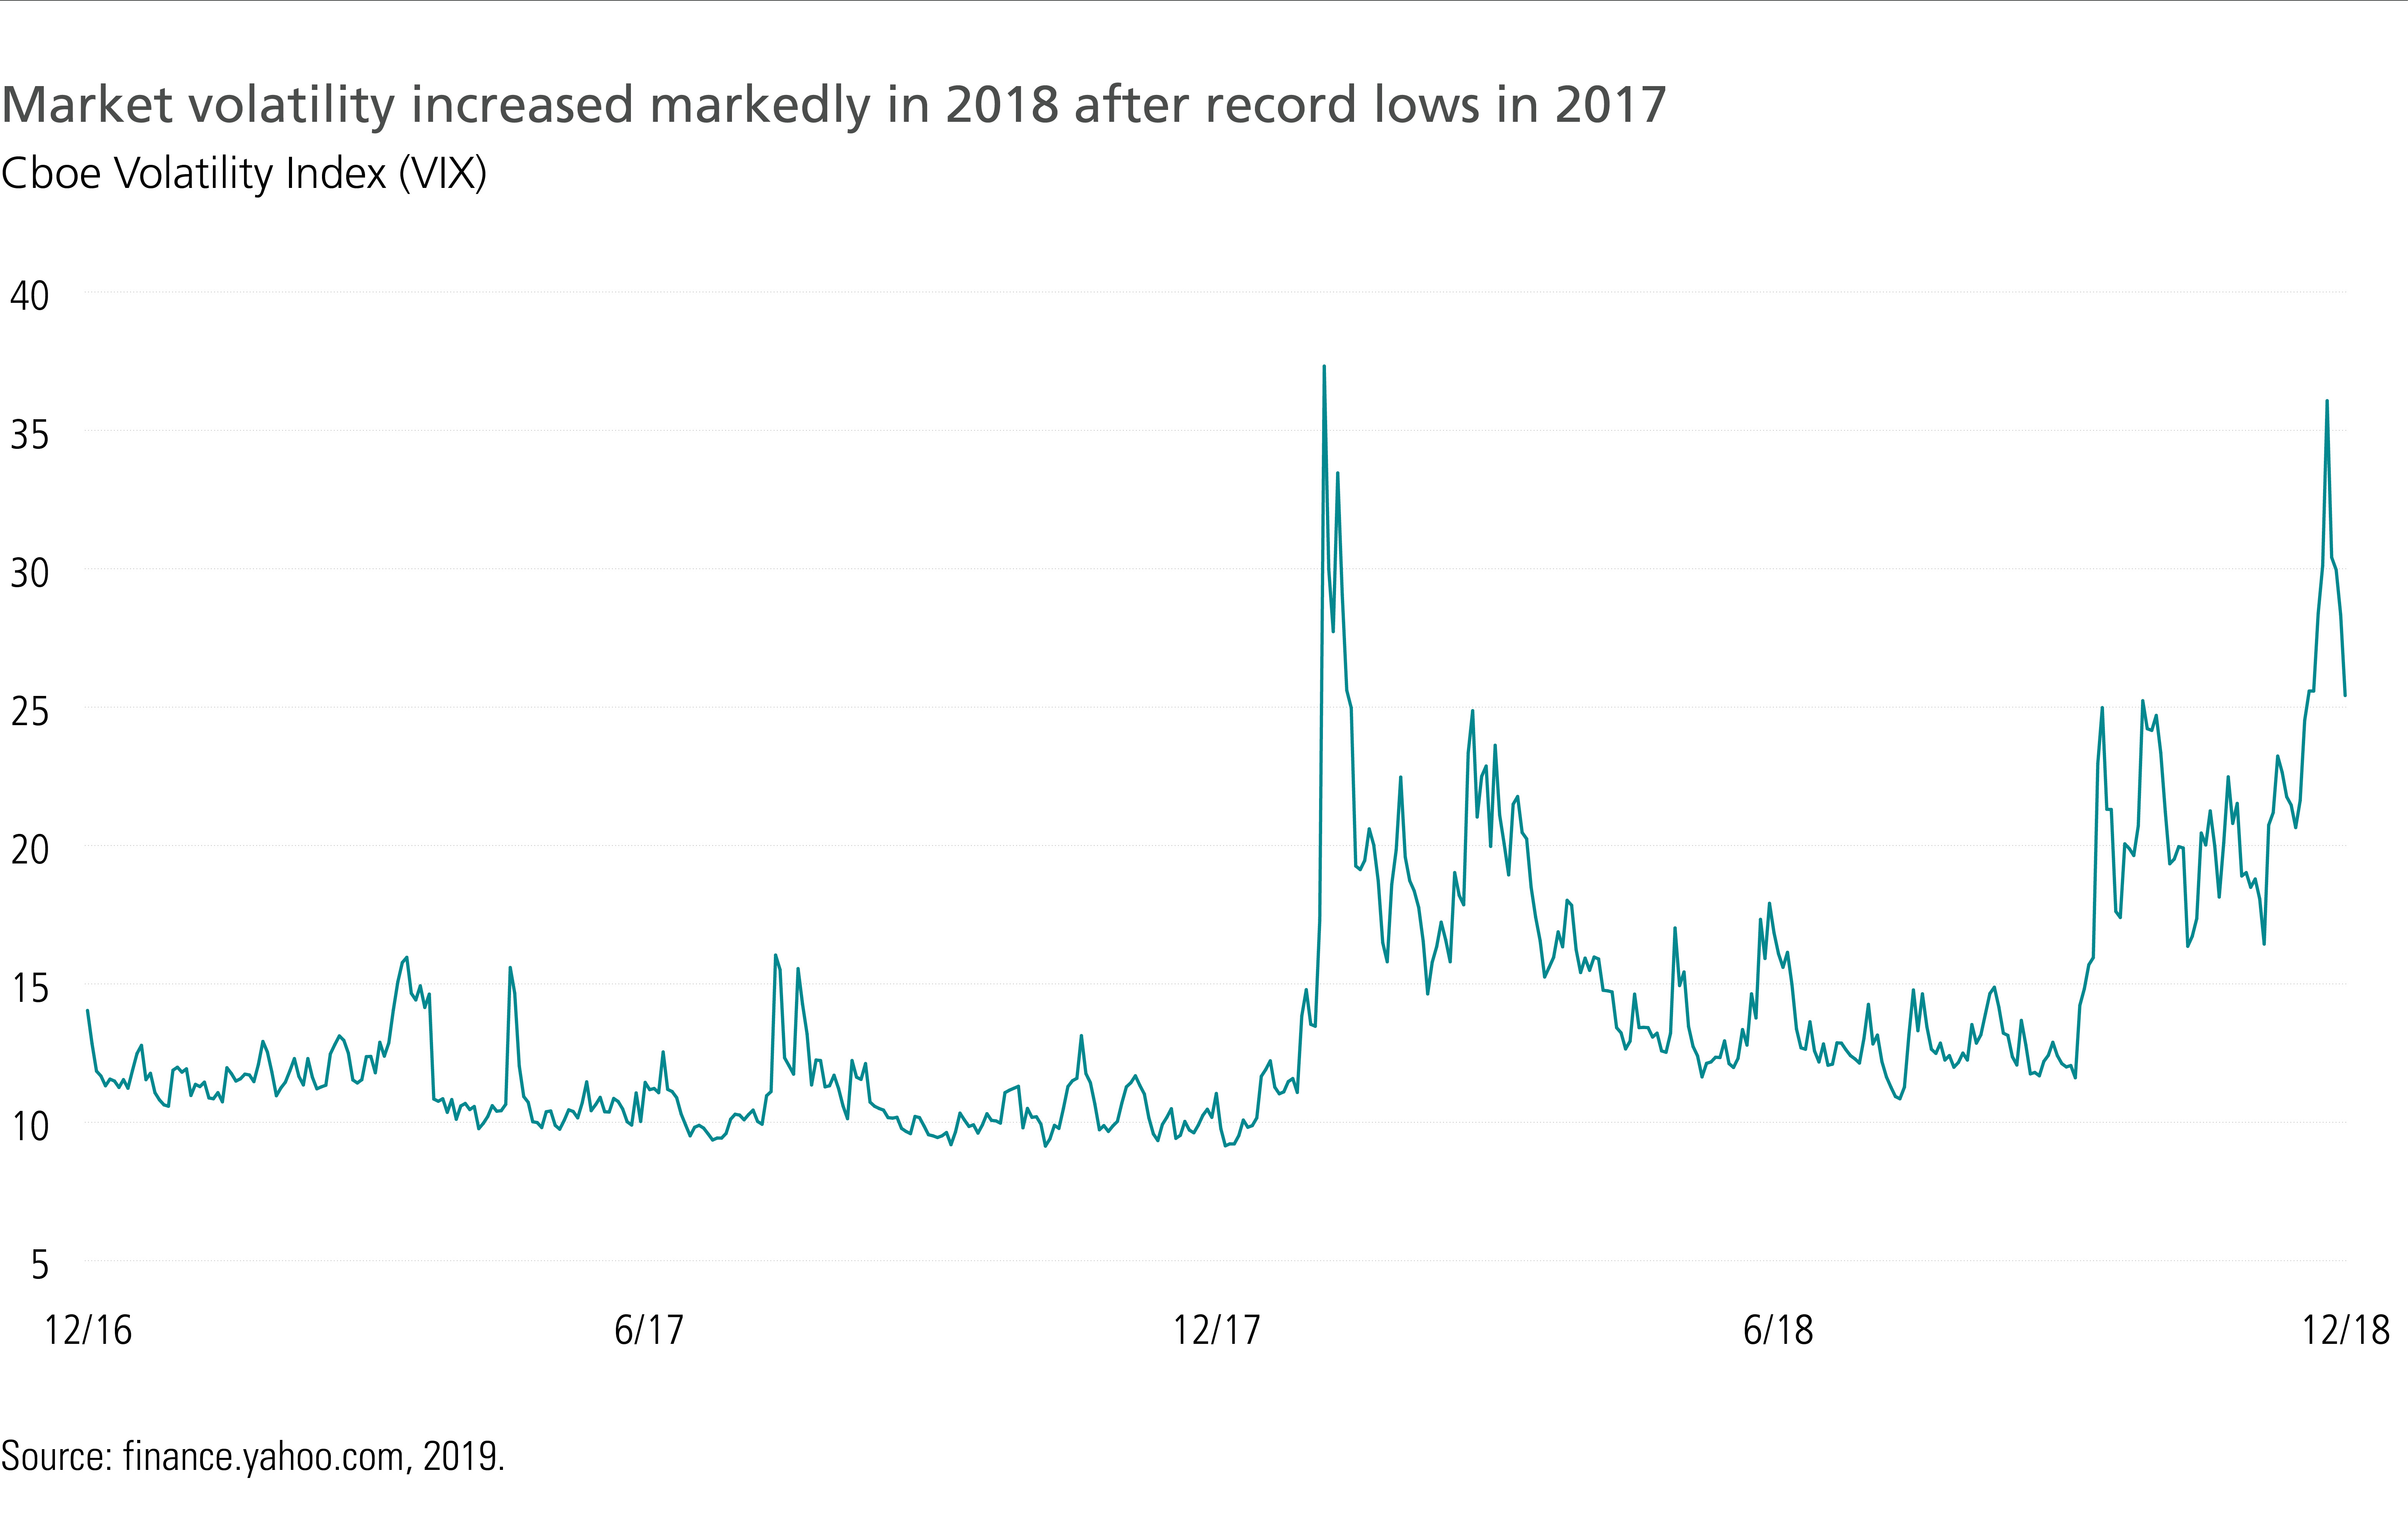 Market volatility increased in 2018